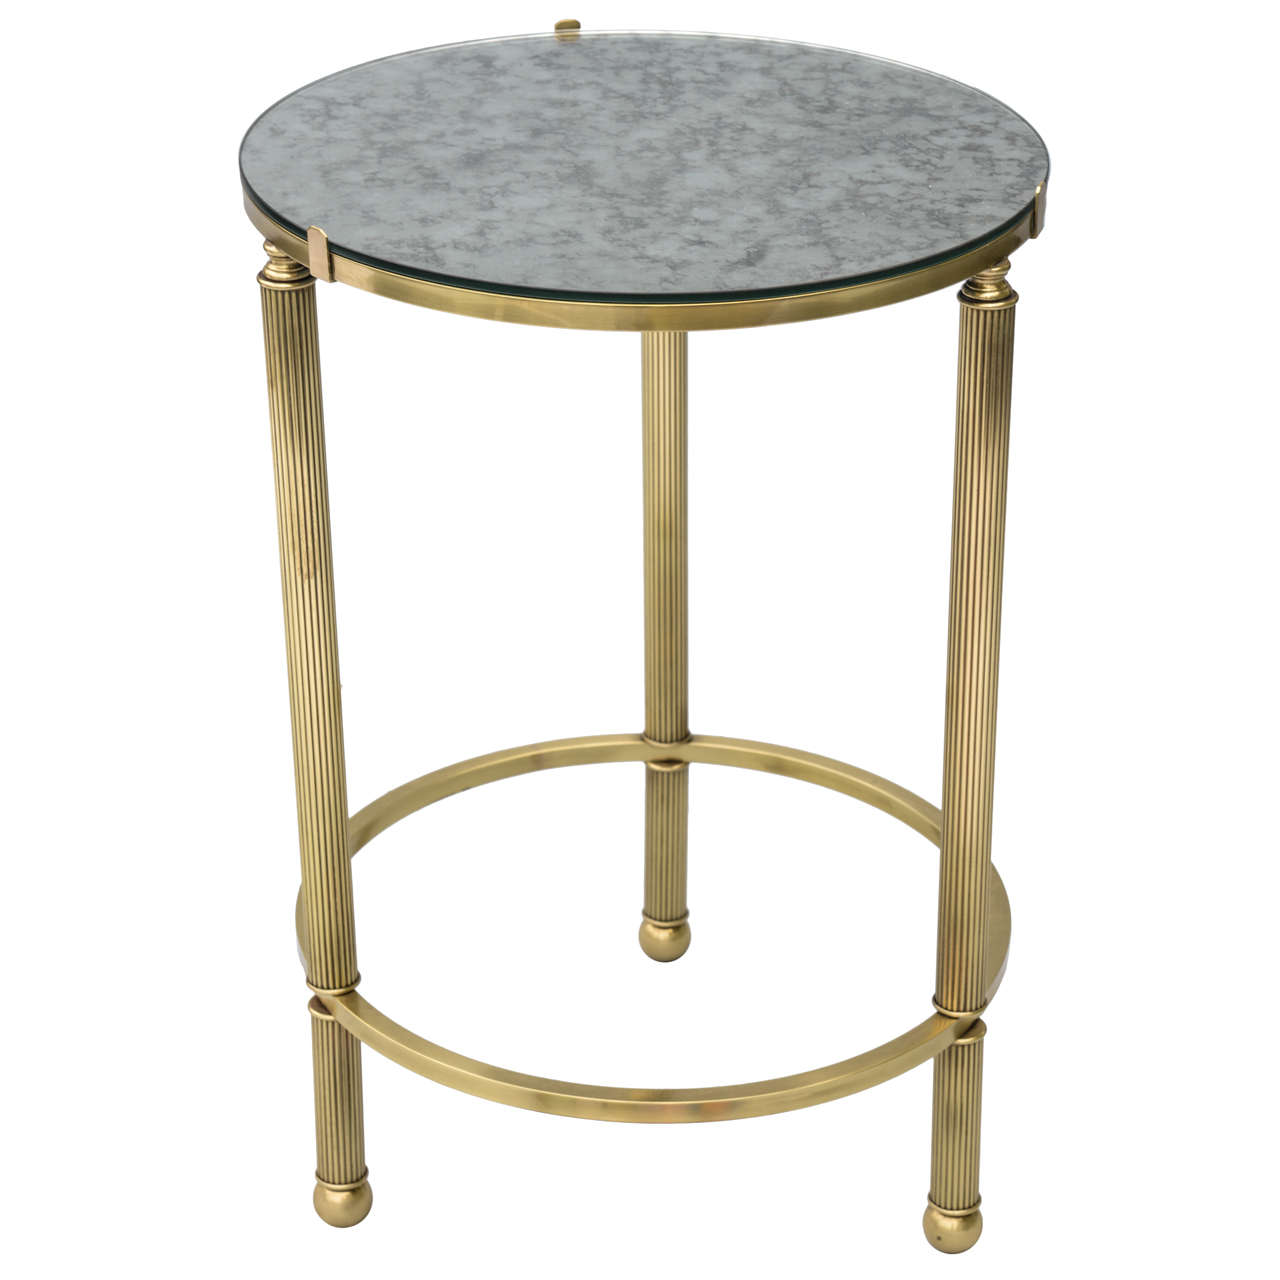 round brass accent table with mirrored top inch high tables sofa set wine rack end skinny white padded runner antique pine furniture wooden lamp hampton bay buffet server ikea